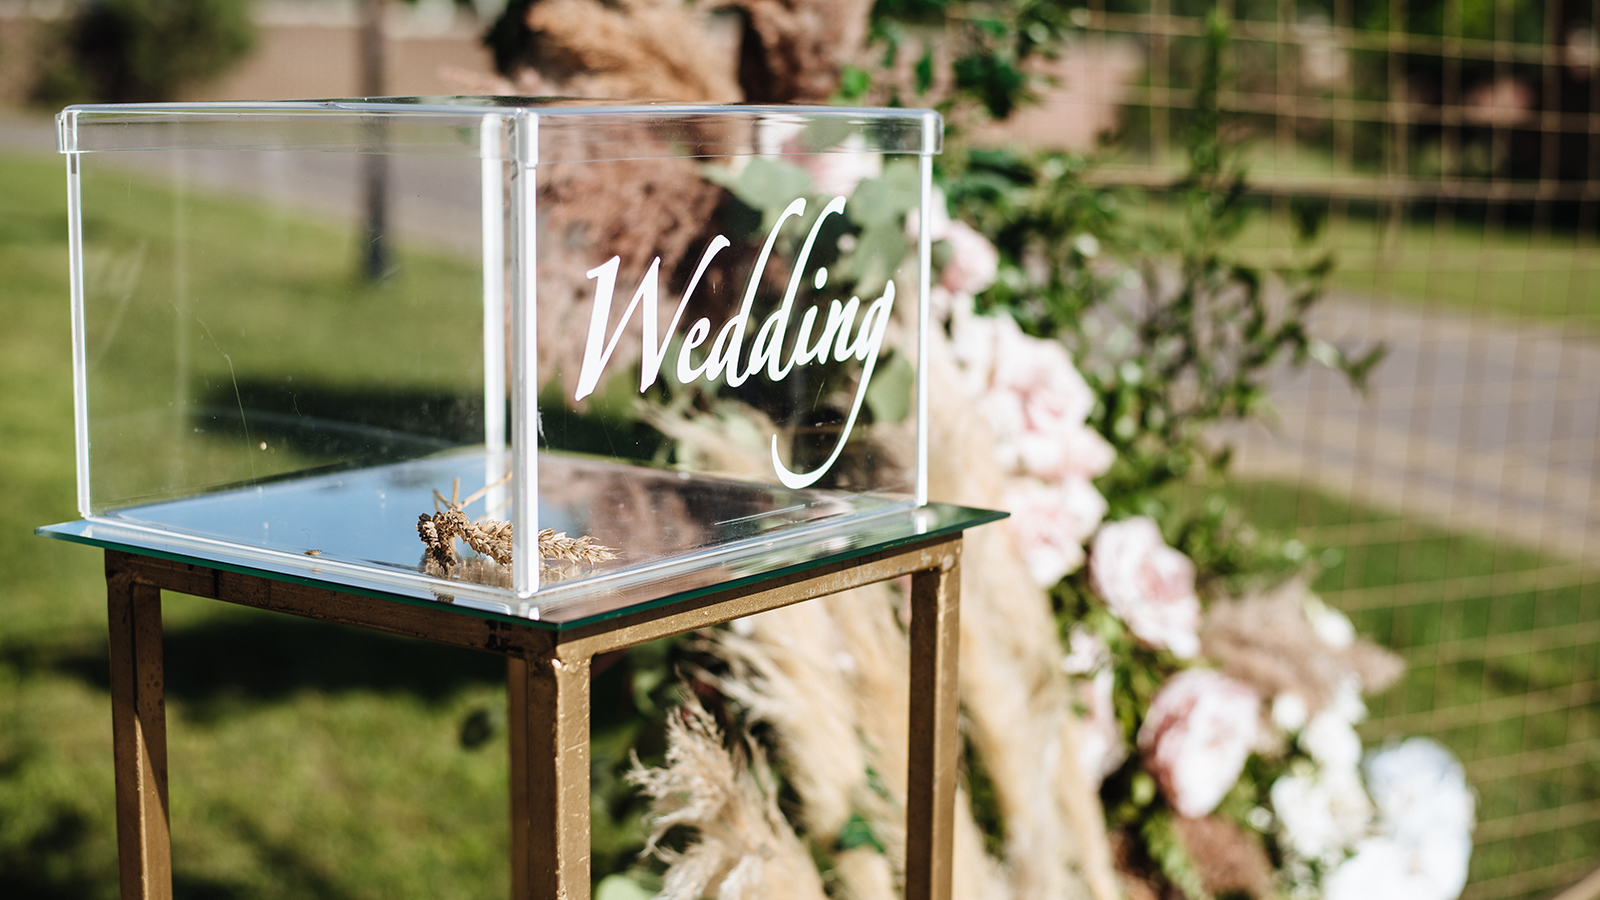 Casket for a wedding for gifts. Glass box for wedding gifts. Wedding decor.